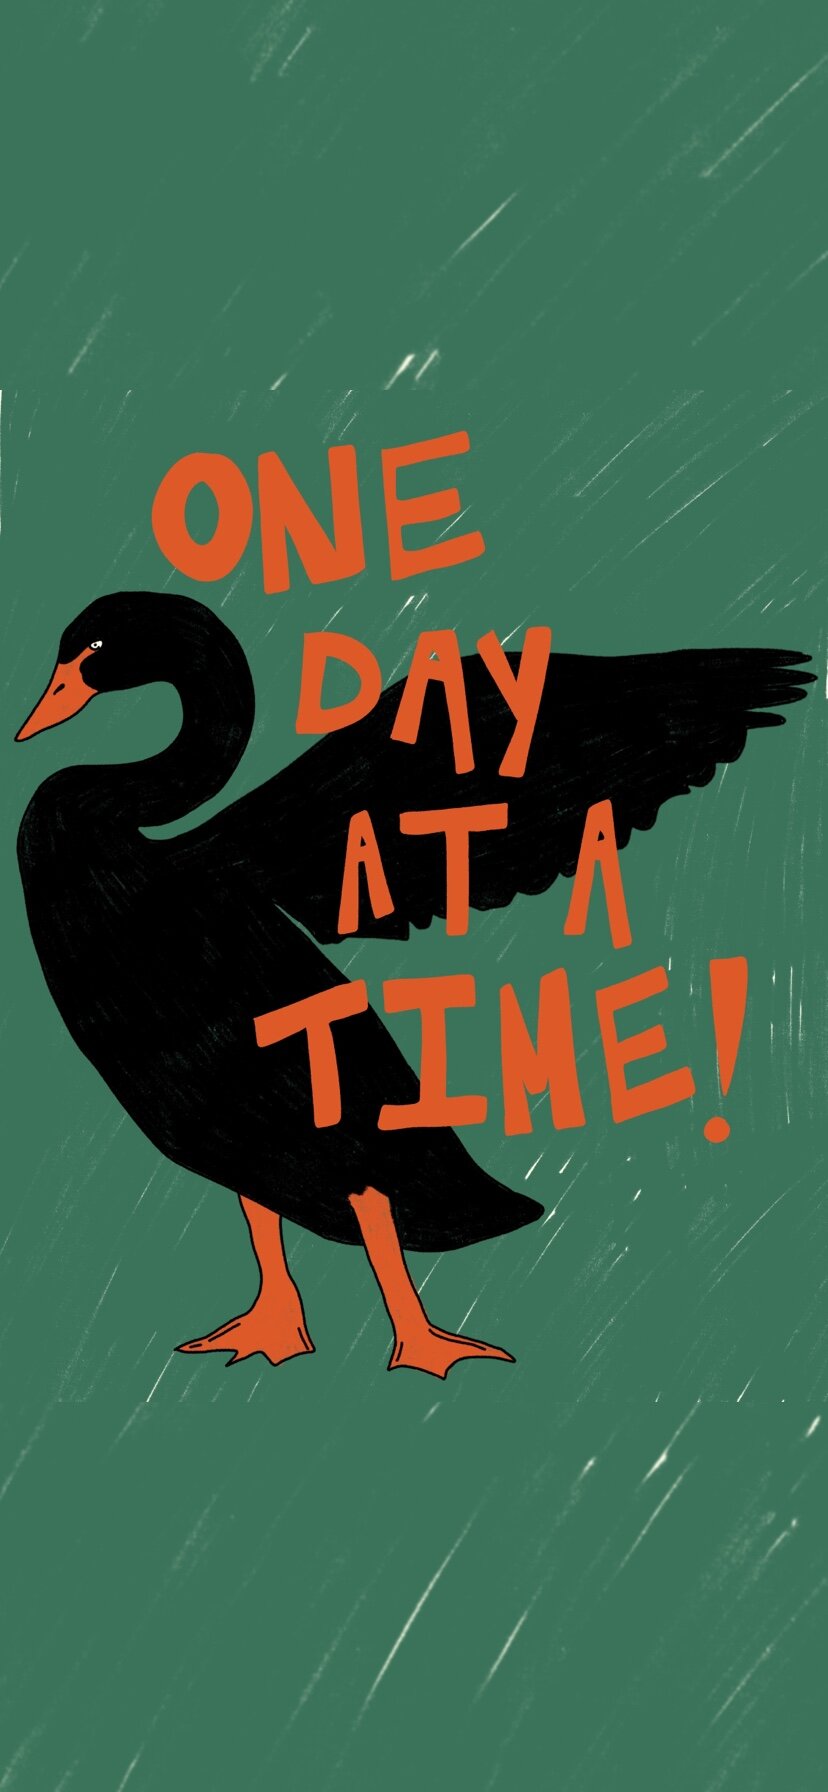 Iphone Wallpaper (One Day at a Time) — fiorenza art